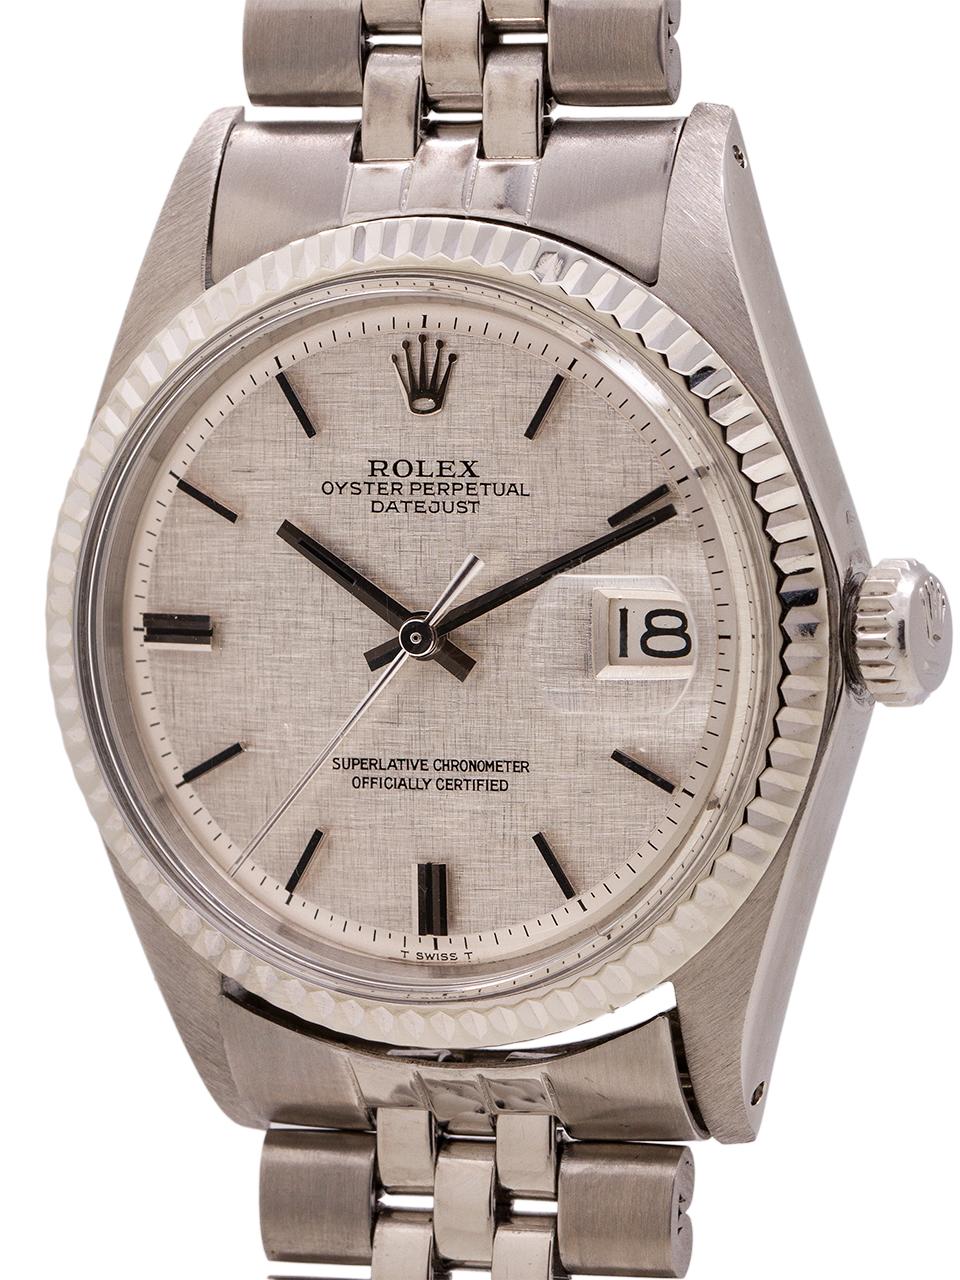 Rolex Datejust Stainless and 14 Karat White Gold with Linen Dial Ref 1601 In Excellent Condition For Sale In West Hollywood, CA